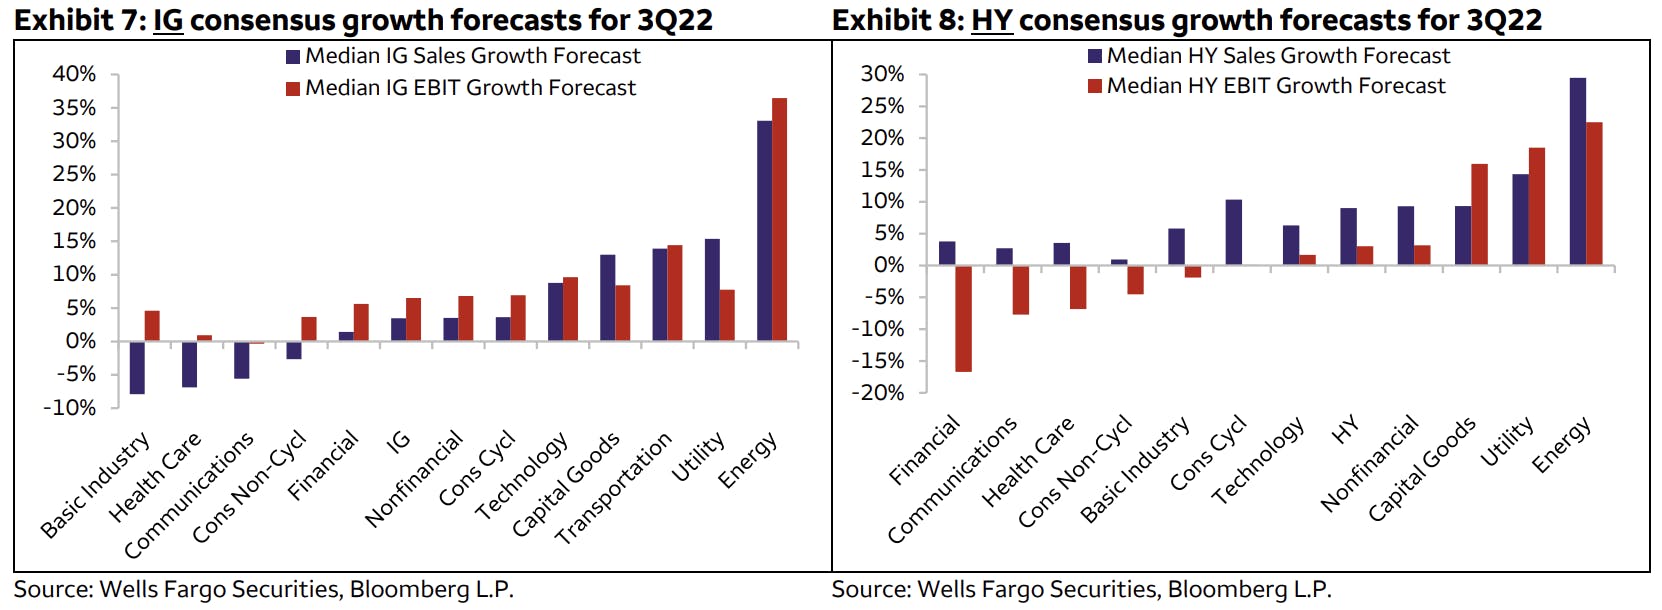 Consensus Growth Forecasts for US IG & HY in 3Q22 | Source: Wells Fargo Securities 